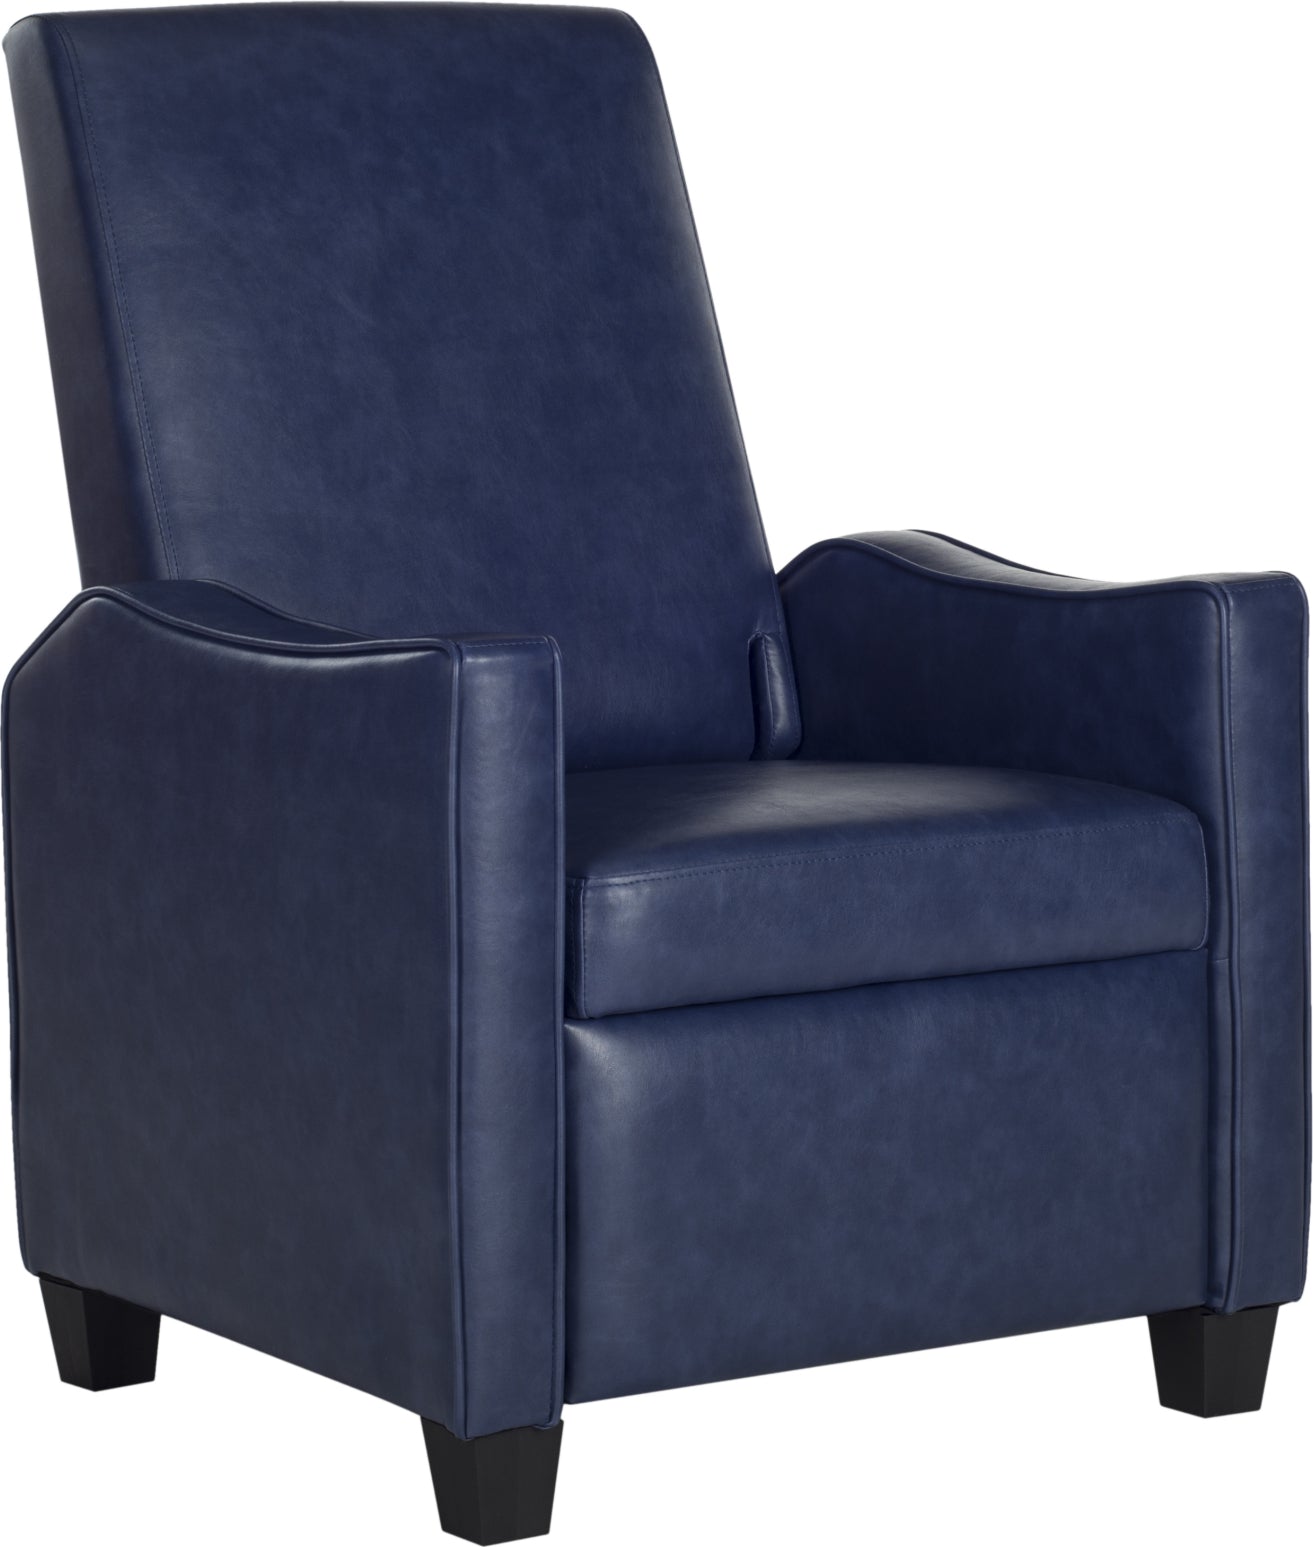 Safavieh Holden Recliner Chair Navy and Black Furniture main image